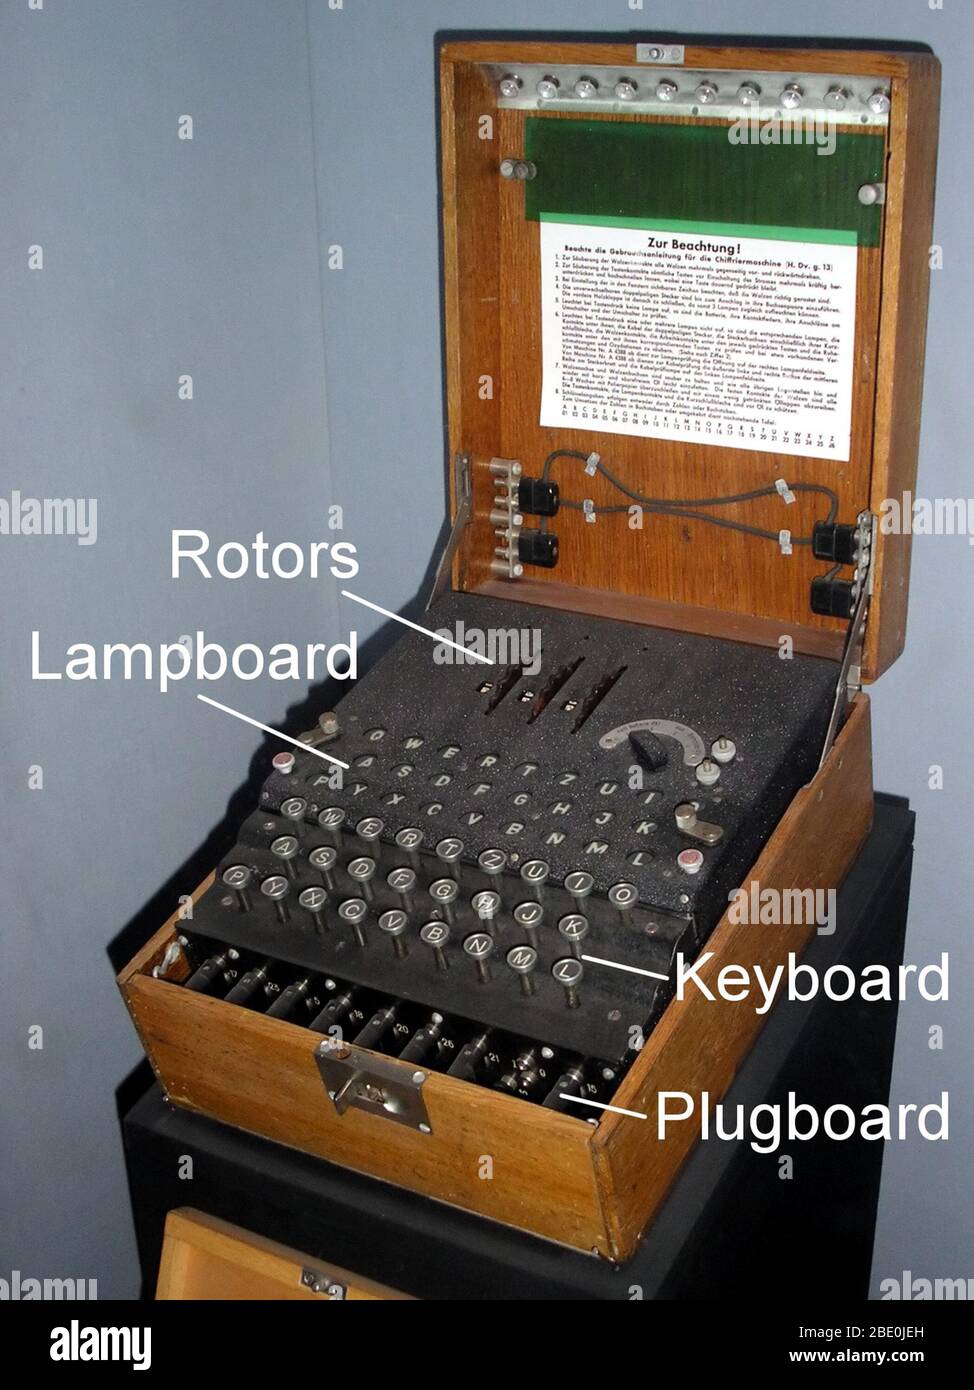 The Enigma machines were a series of electro-mechanical rotor cipher machines developed and used in the early-to mid-20th century to protect commercial, diplomatic and military communication. Enigma was invented by the German engineer Arthur Scherbius at the end of World War I. Early models were used commercially from the early 1920s, and adopted by military and government services of several countries, most notably Nazi Germany before and during World War II. Several different Enigma models were produced, but the German military models, having a plugboard, were the most complex. Alan Turing w Stock Photo